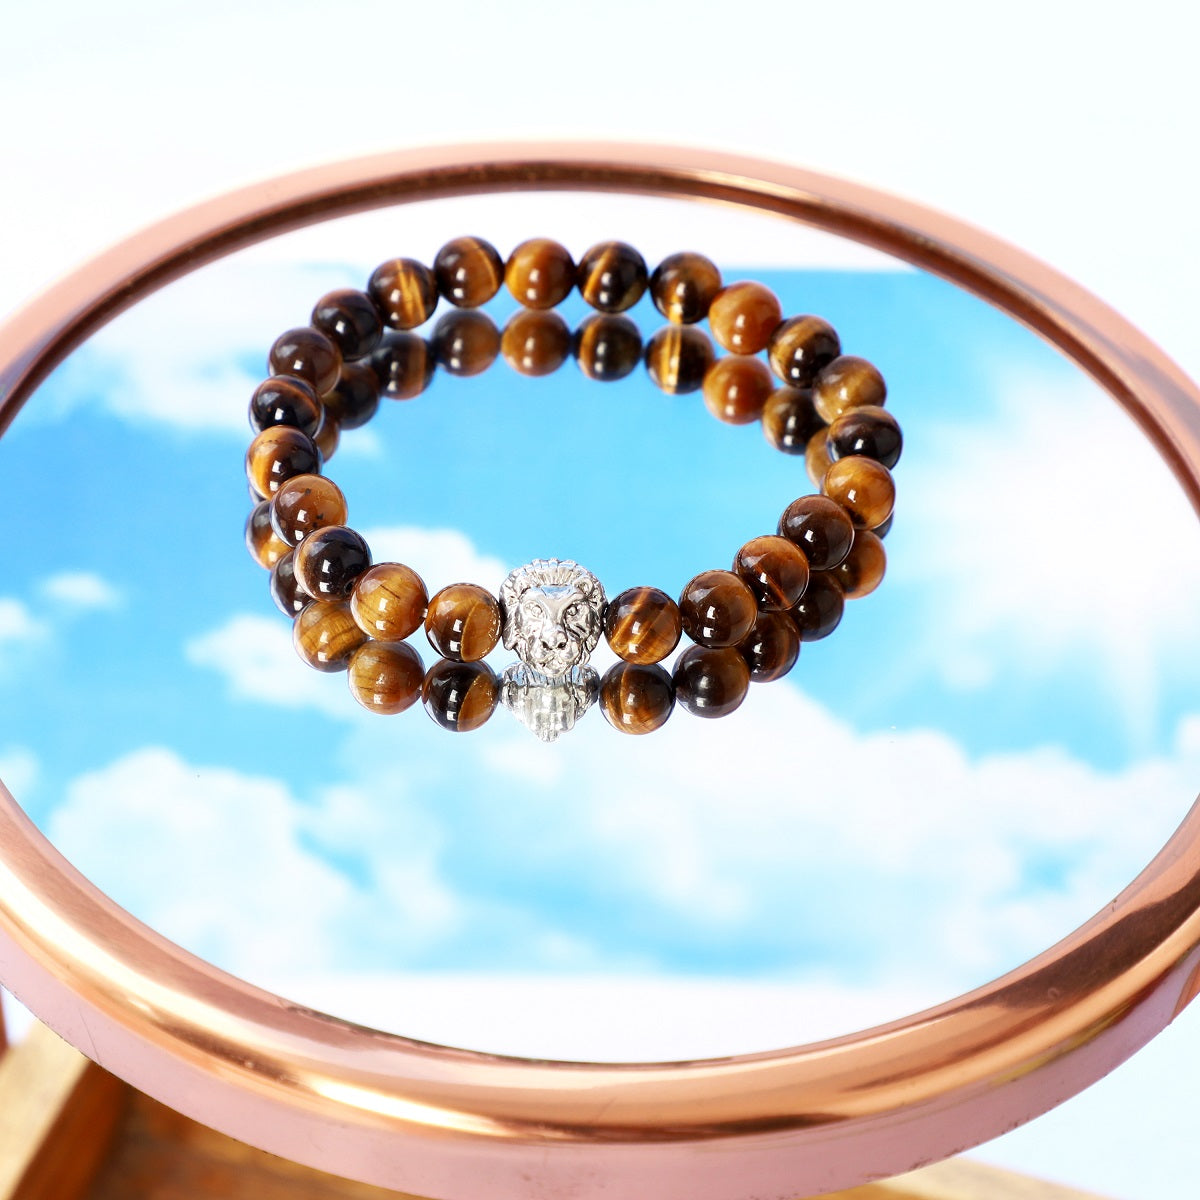 Lion Face Charm Bracelet with Tiger's Eye Beads